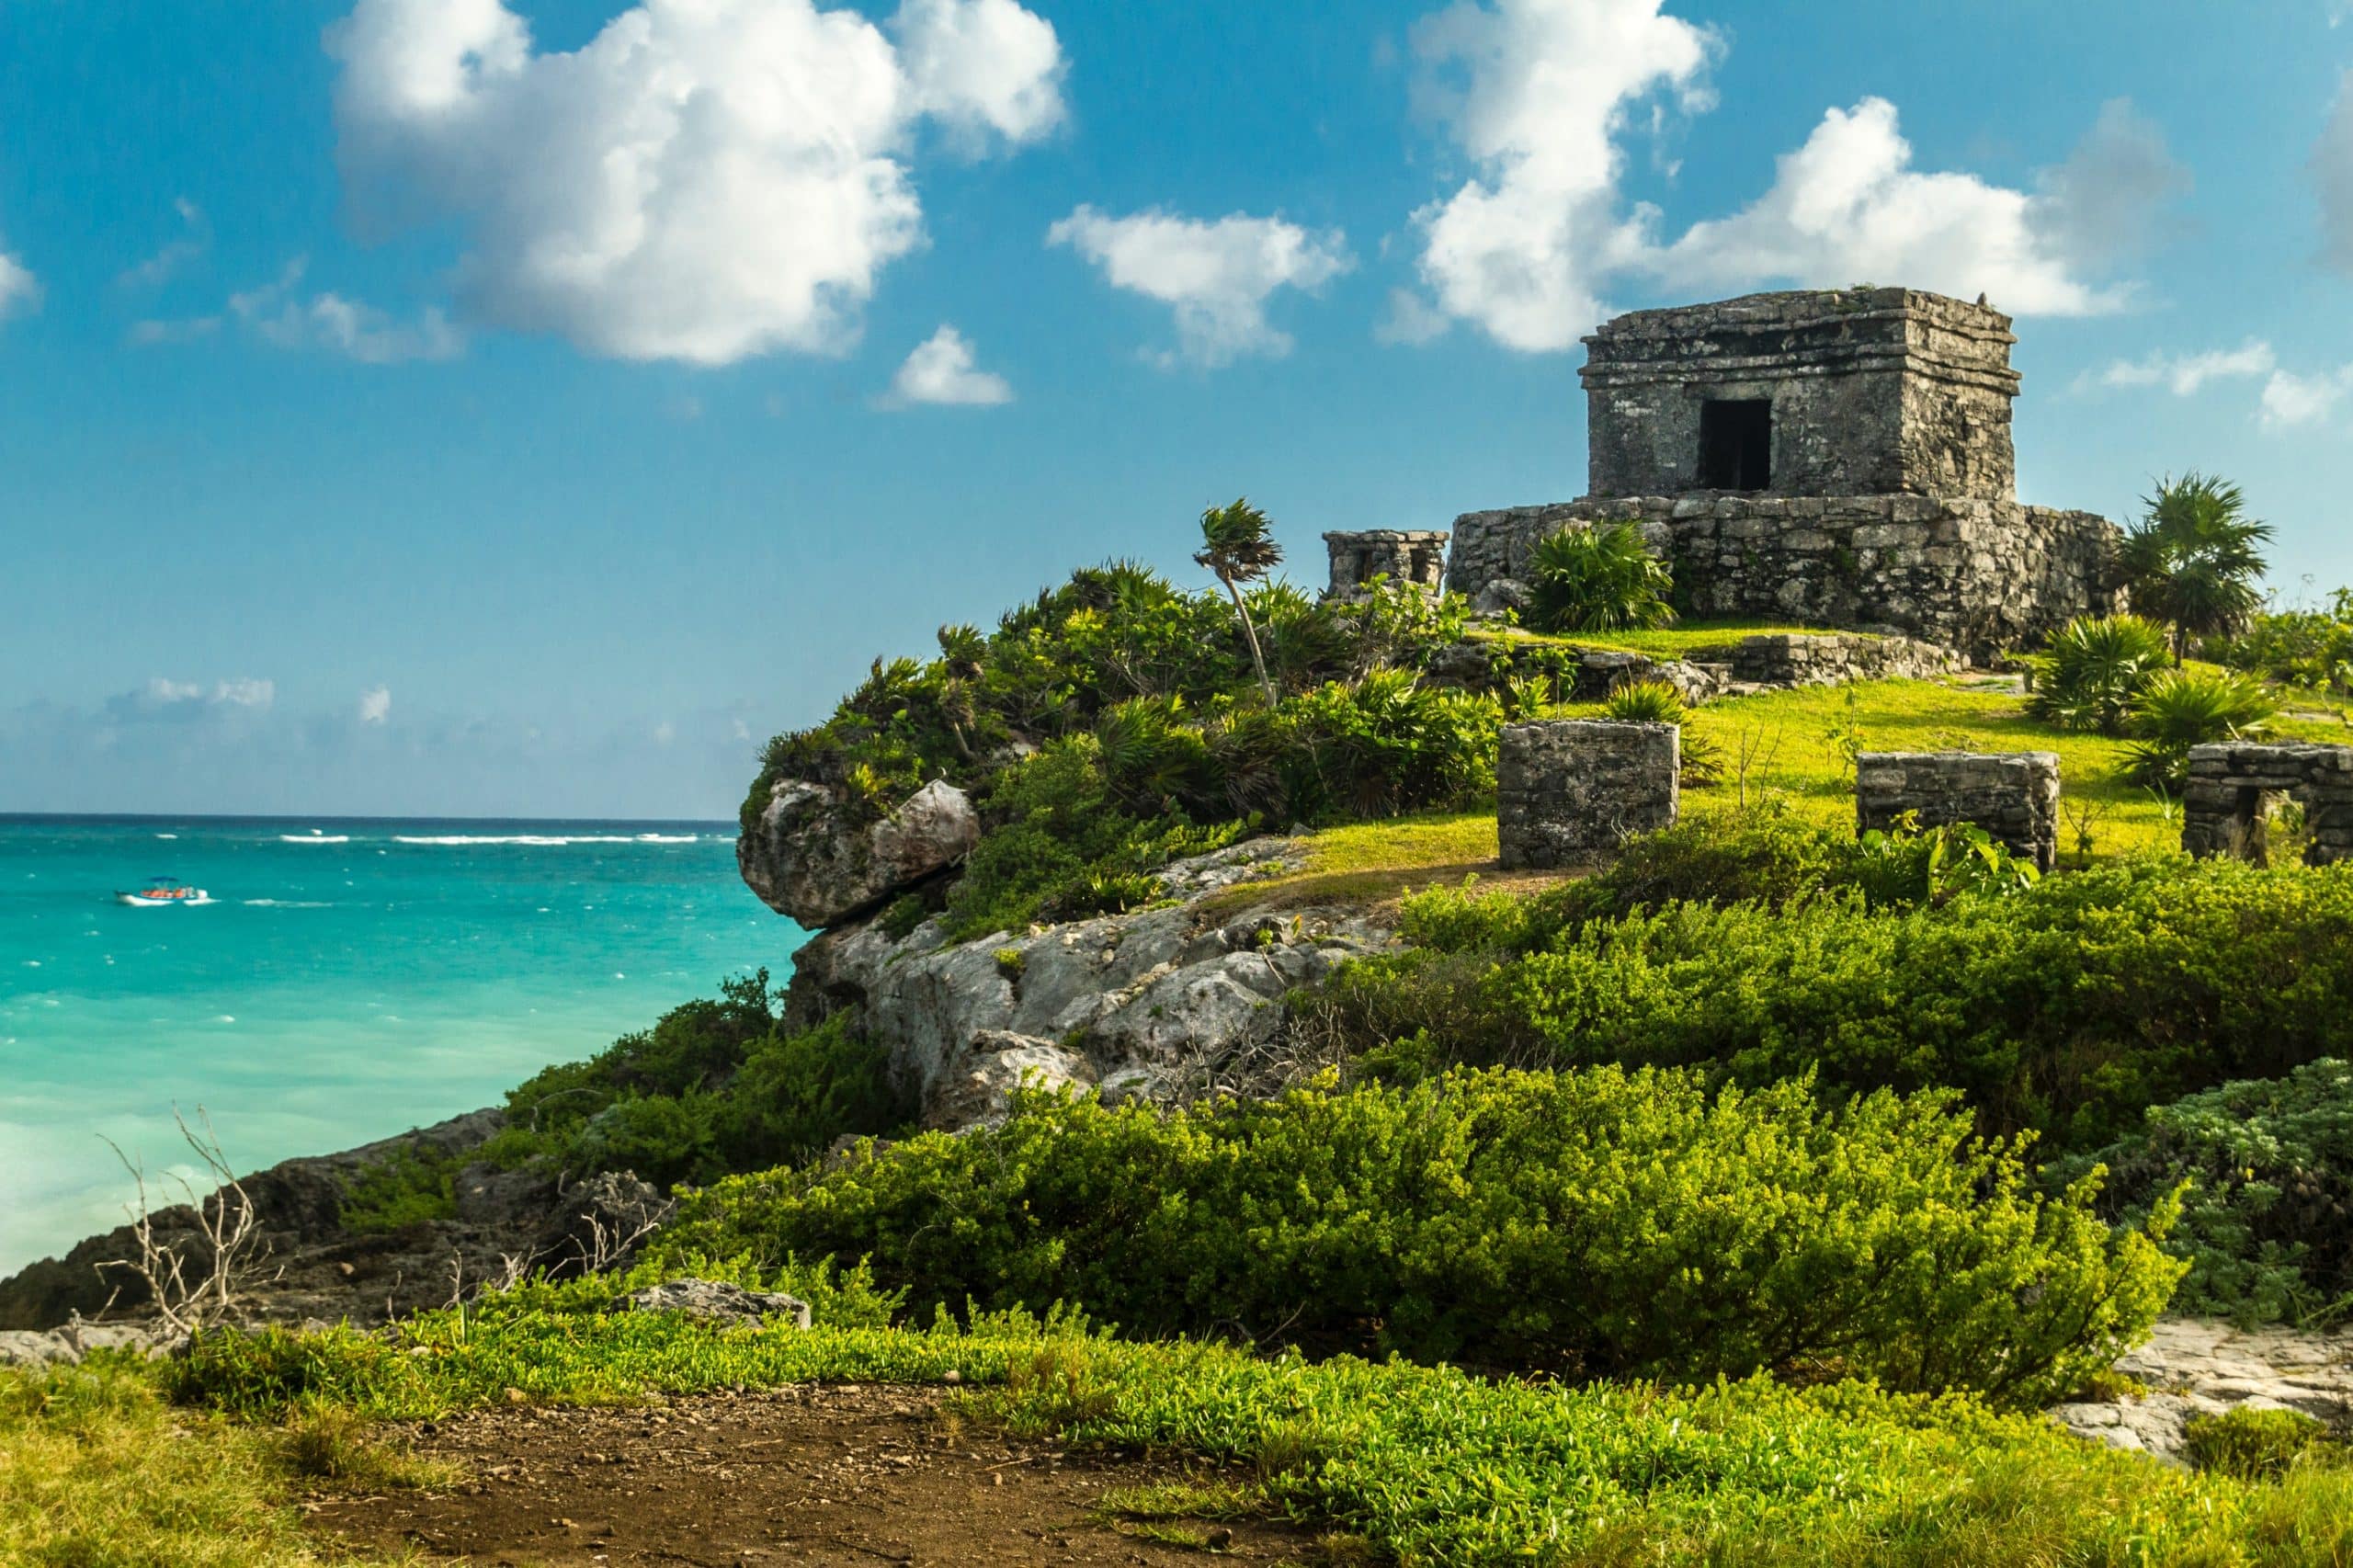 Archeological ruins by the ocean in Tulum, Mexico